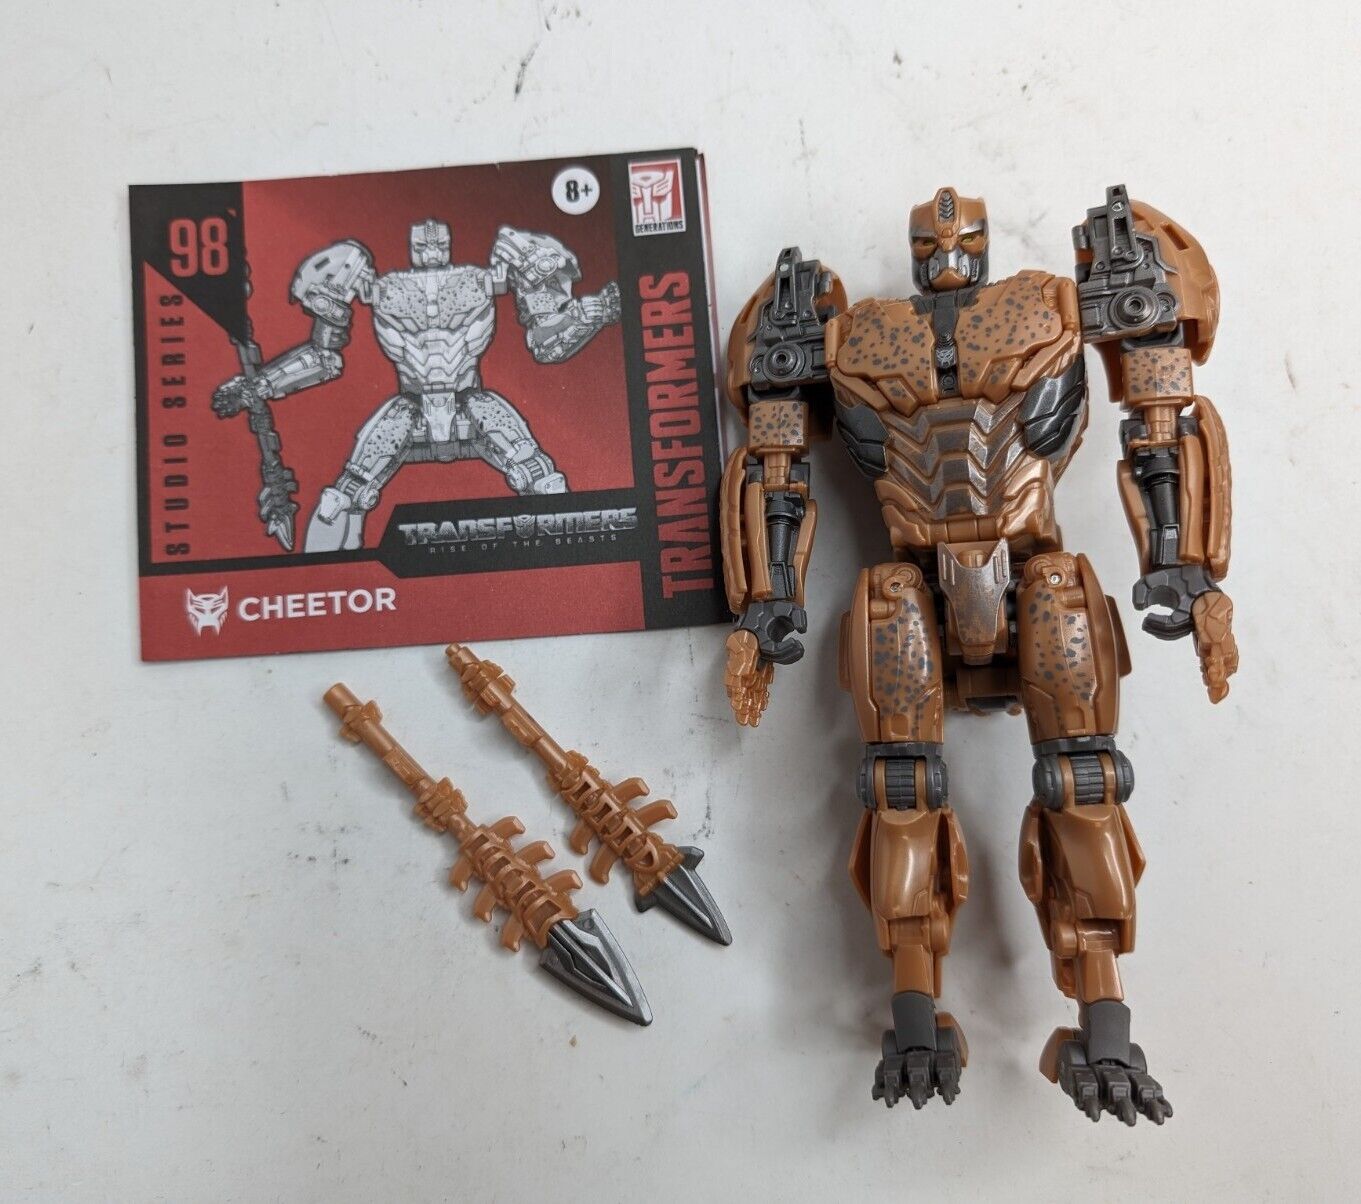 Hasbro Transformers Studio Series 98 Cheetor COMPLETE Rise Of The Beasts